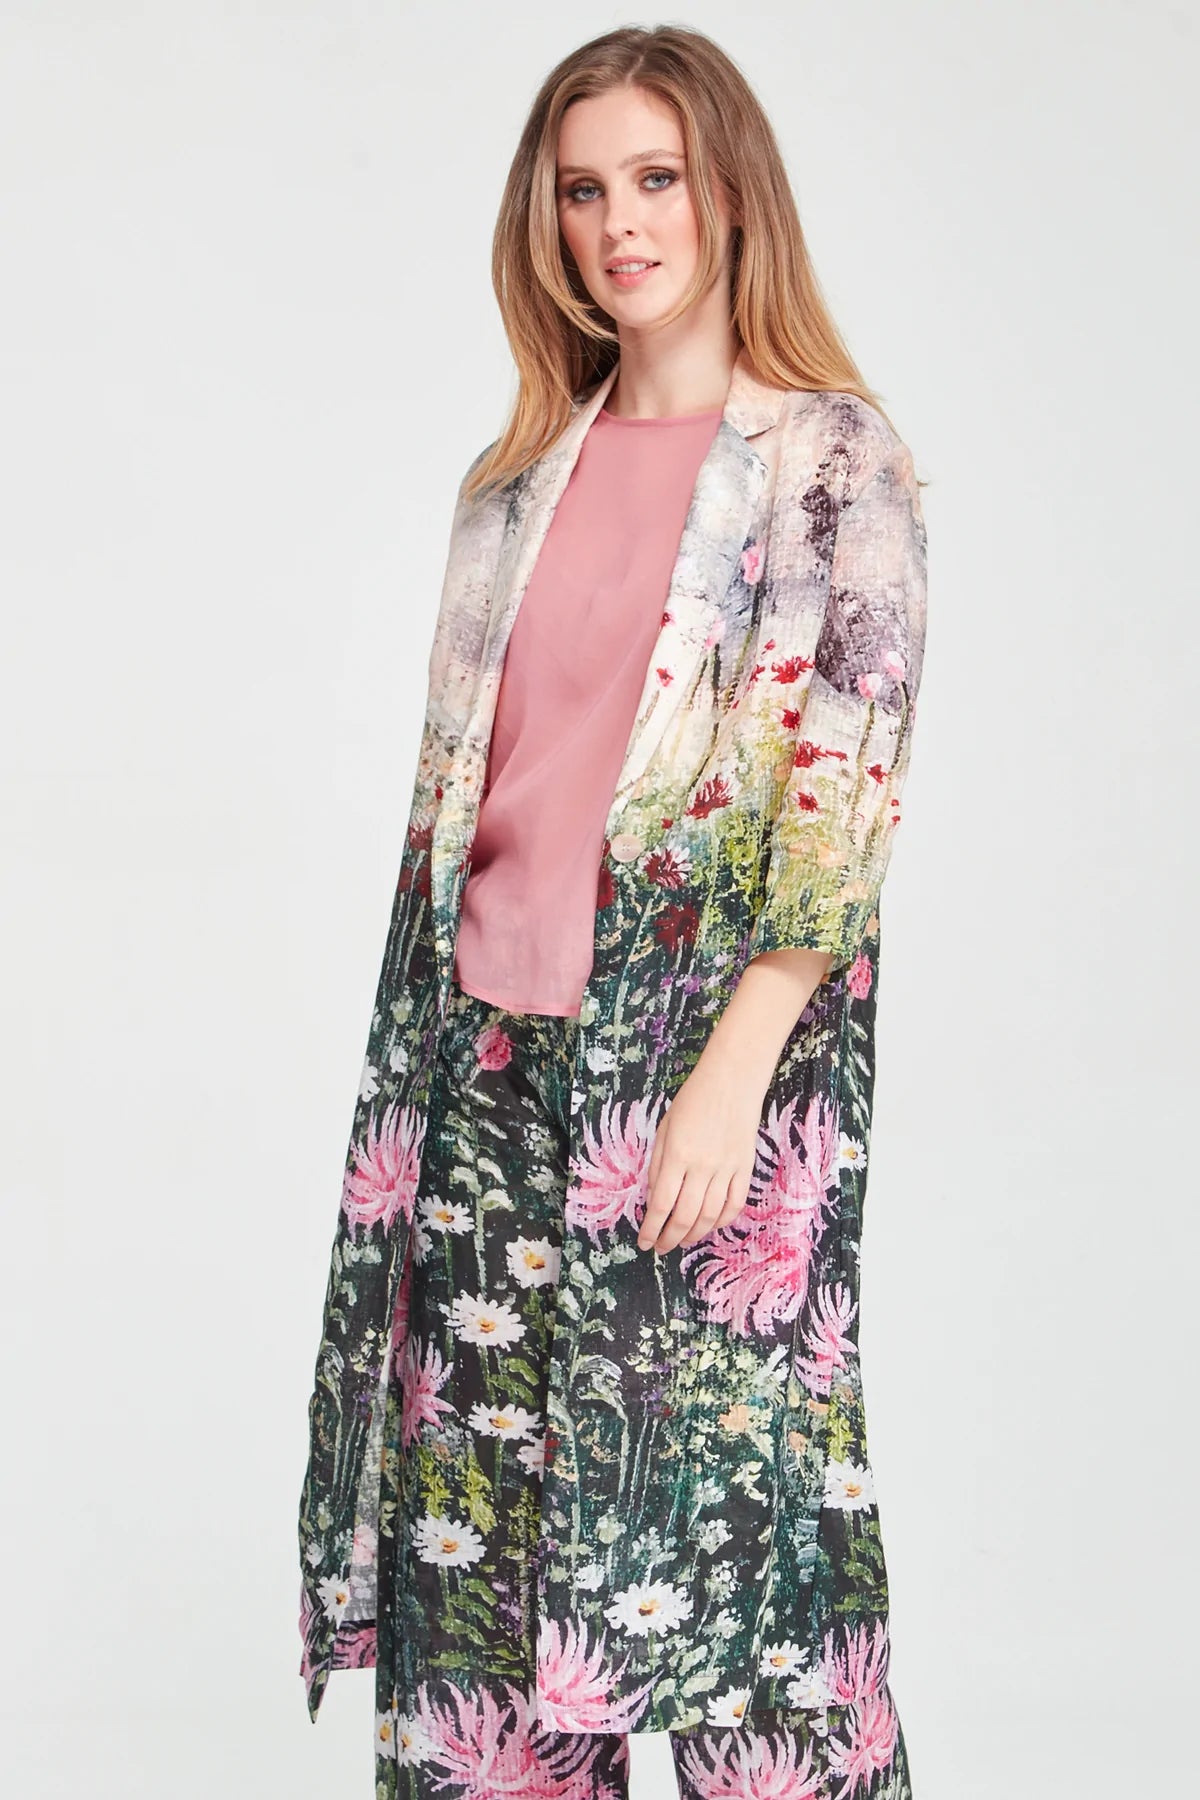 Curate - Star Duster Coat Black Floral